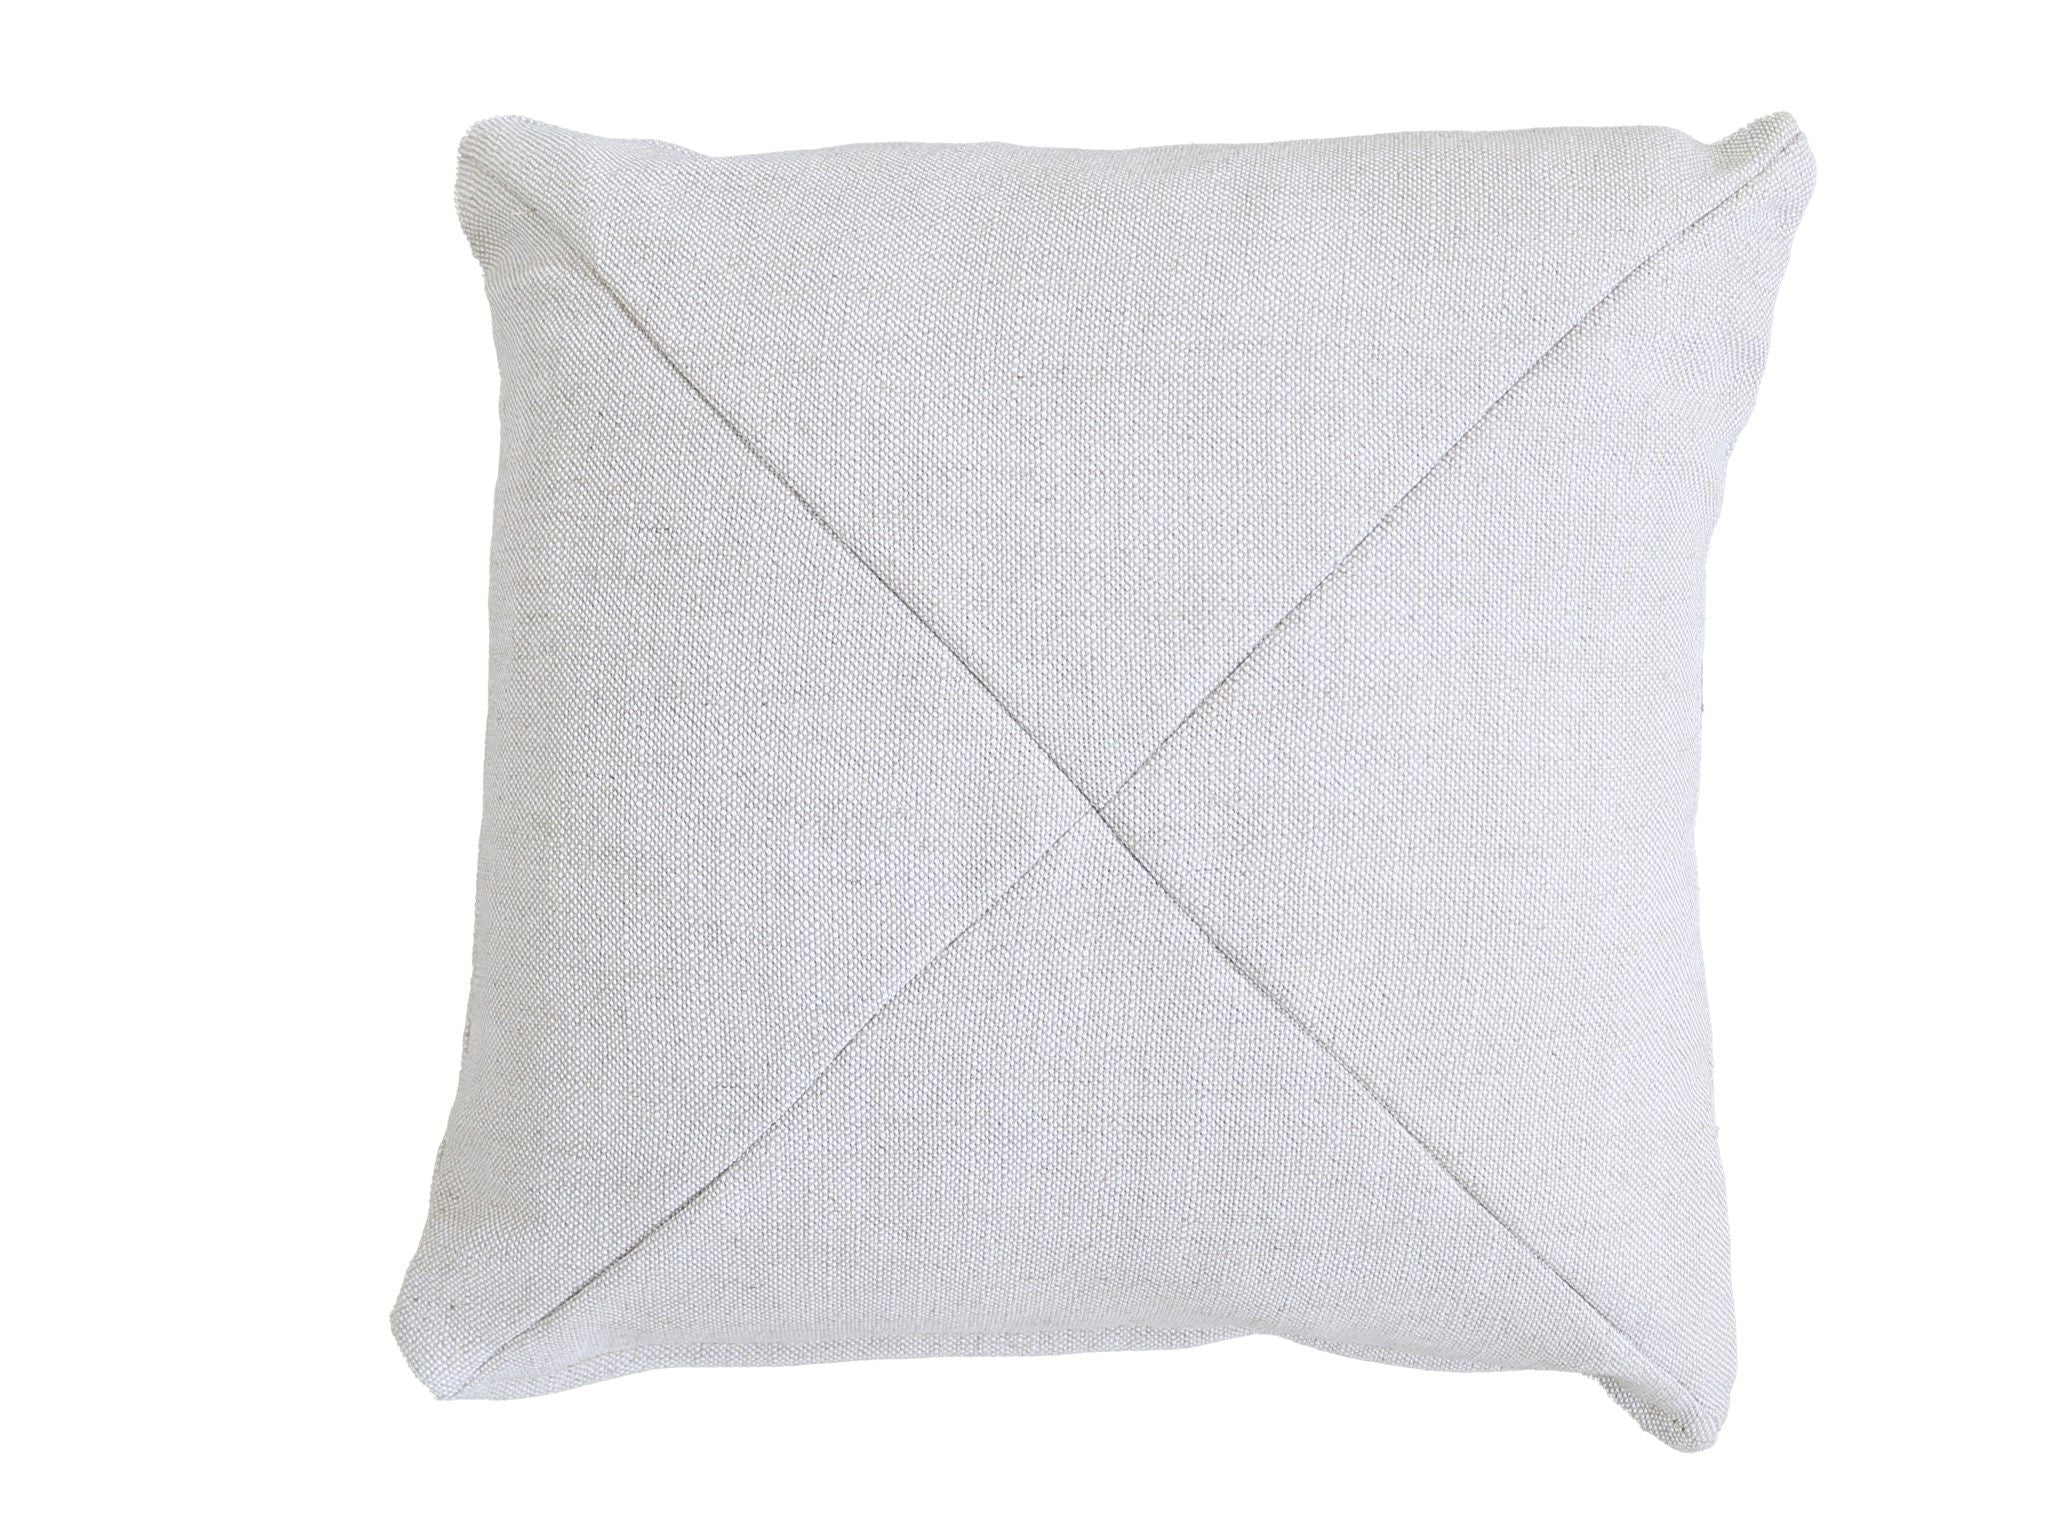 20" x 20" Pillow Miter Cut, Special Order - White